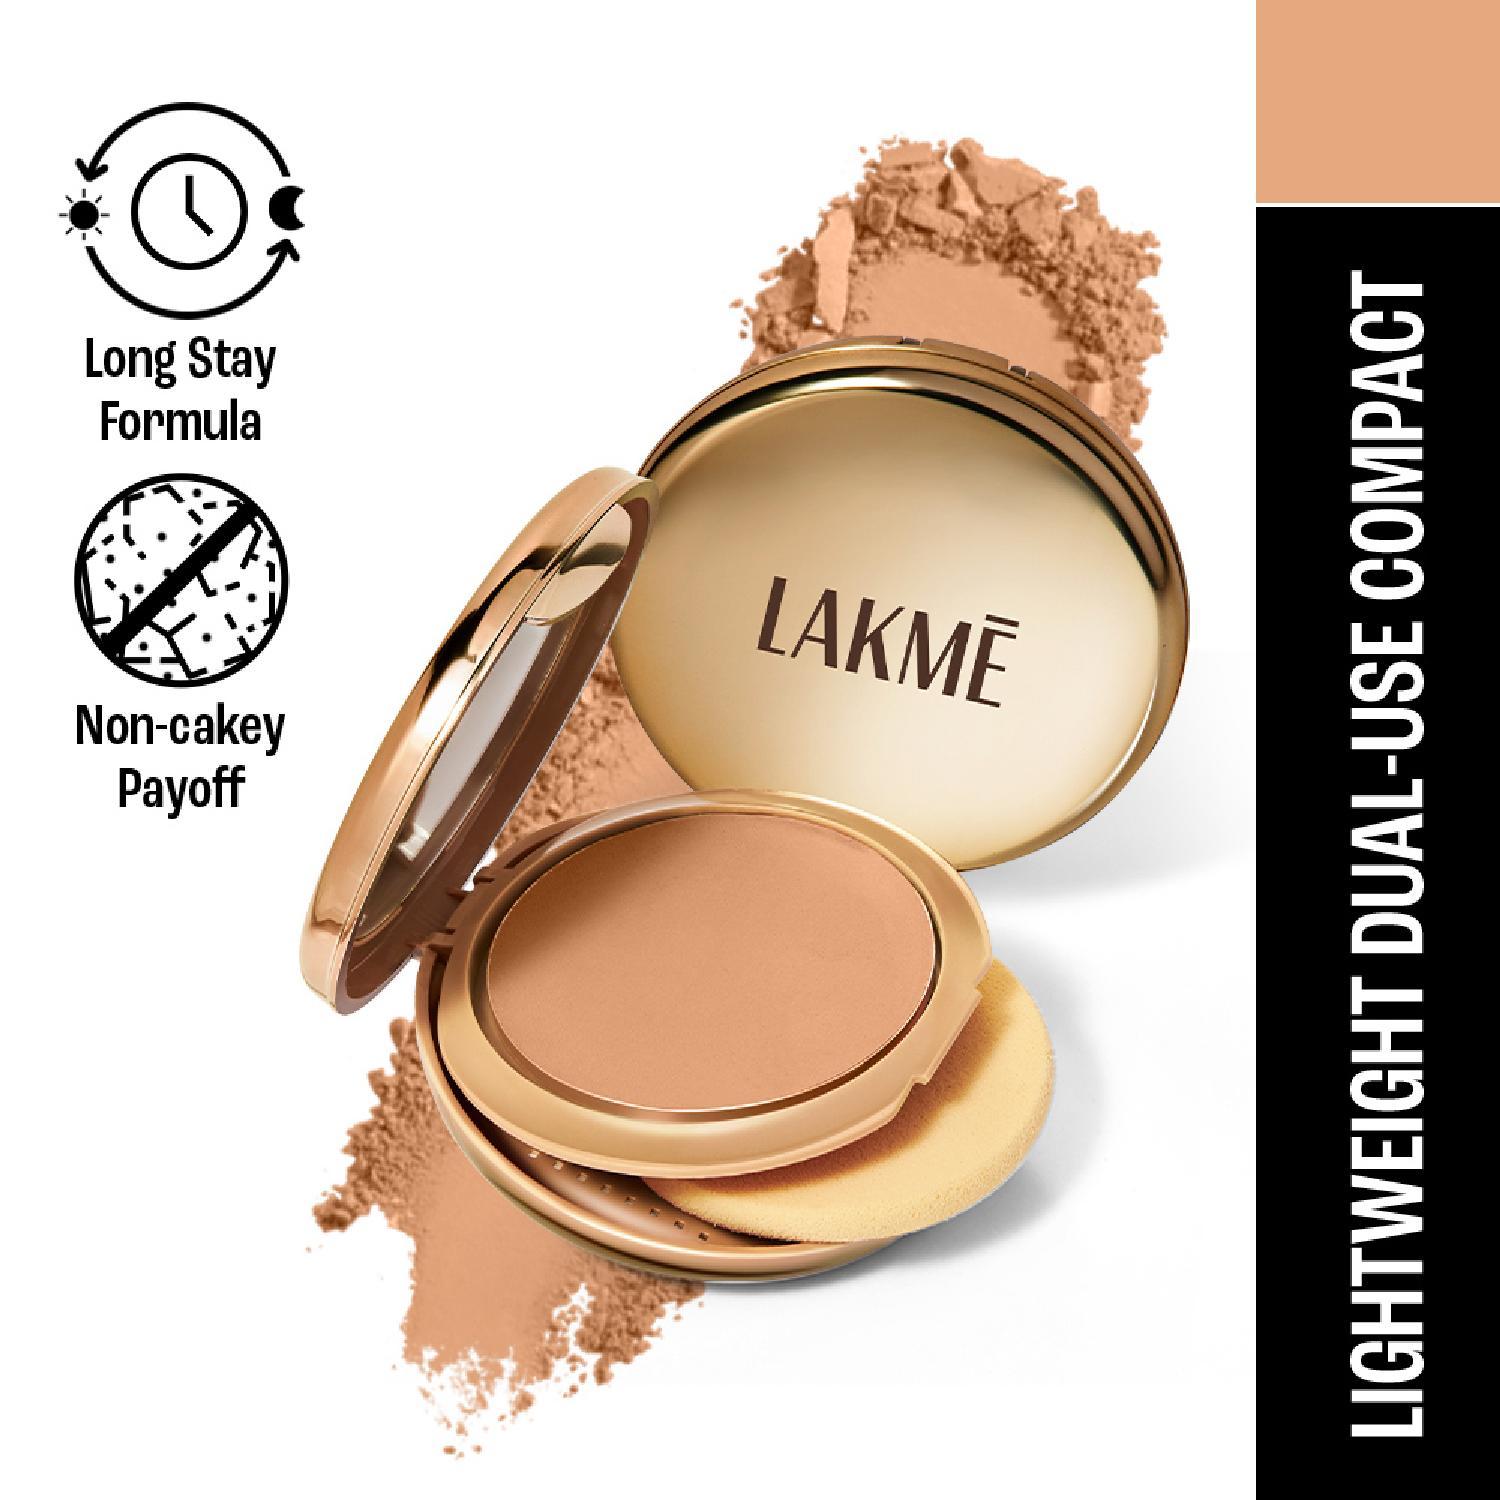 Lakme | Lakme 9 to 5 Unreal Dual Cover Pressed Powder, 2 In 1 Compact + Foundation, 16 Sand (9g)